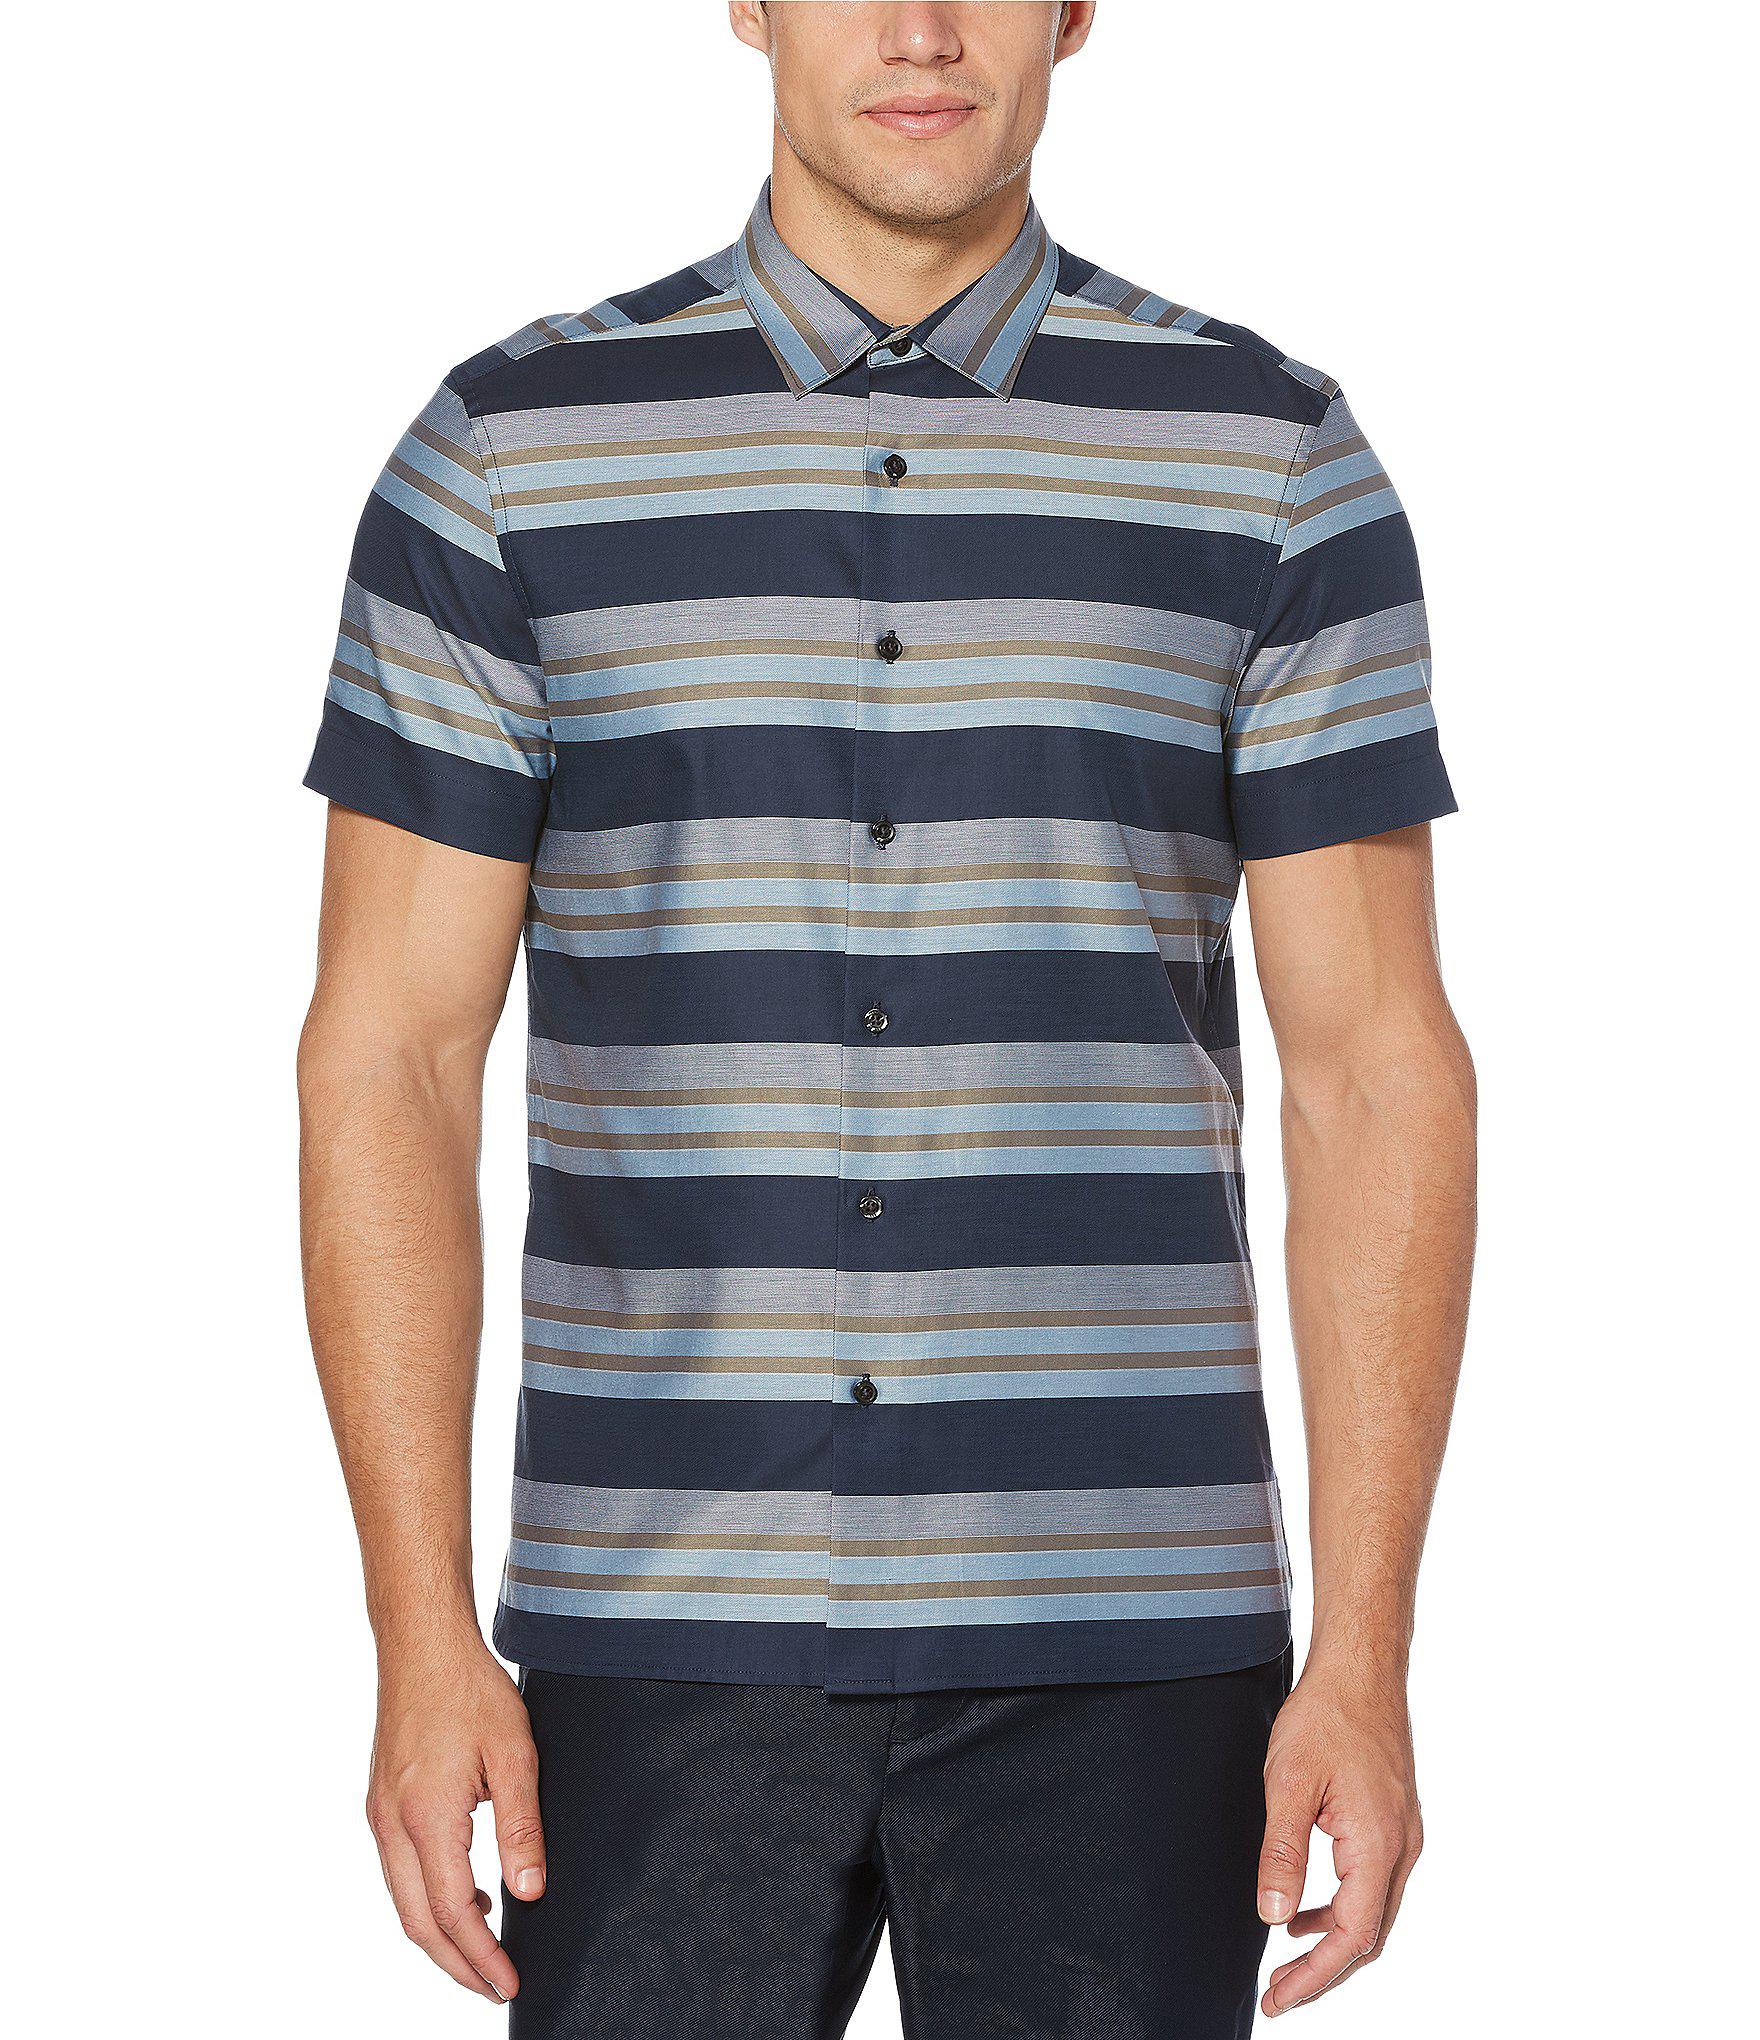 Lyst - Perry Ellis Multi-color Stripe Short-sleeve Woven Shirt in Blue ...